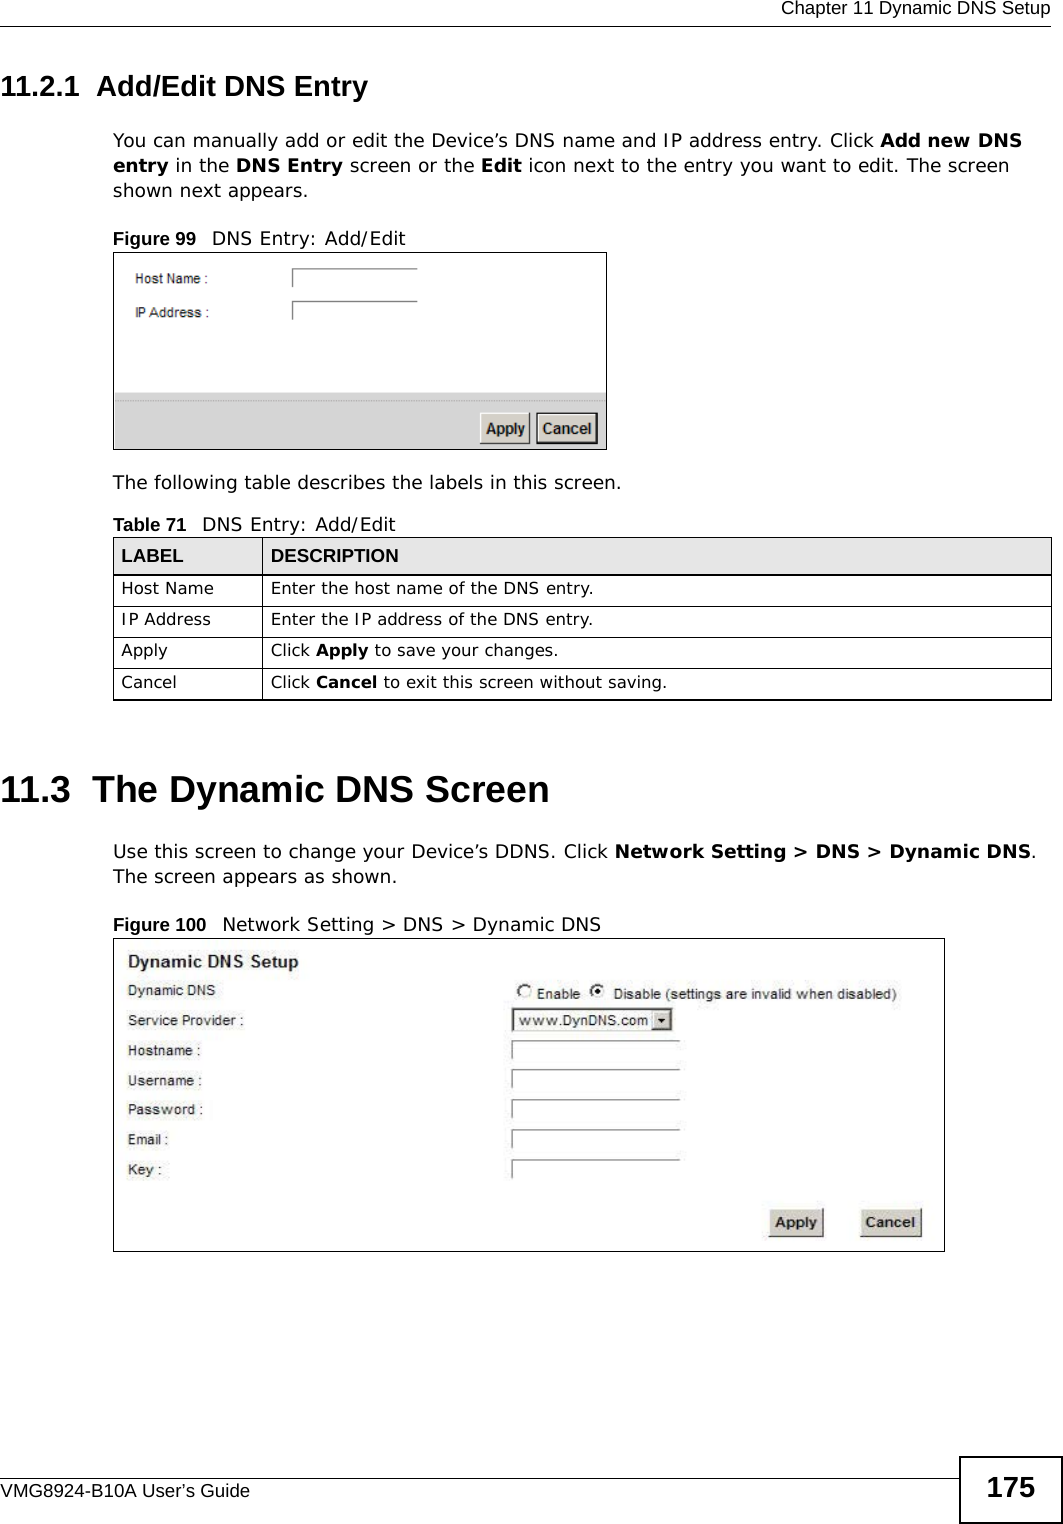  Chapter 11 Dynamic DNS SetupVMG8924-B10A User’s Guide 17511.2.1  Add/Edit DNS EntryYou can manually add or edit the Device’s DNS name and IP address entry. Click Add new DNS entry in the DNS Entry screen or the Edit icon next to the entry you want to edit. The screen shown next appears.Figure 99   DNS Entry: Add/EditThe following table describes the labels in this screen. 11.3  The Dynamic DNS ScreenUse this screen to change your Device’s DDNS. Click Network Setting &gt; DNS &gt; Dynamic DNS. The screen appears as shown.Figure 100   Network Setting &gt; DNS &gt; Dynamic DNSTable 71   DNS Entry: Add/EditLABEL DESCRIPTIONHost Name Enter the host name of the DNS entry.IP Address Enter the IP address of the DNS entry.Apply Click Apply to save your changes.Cancel Click Cancel to exit this screen without saving.